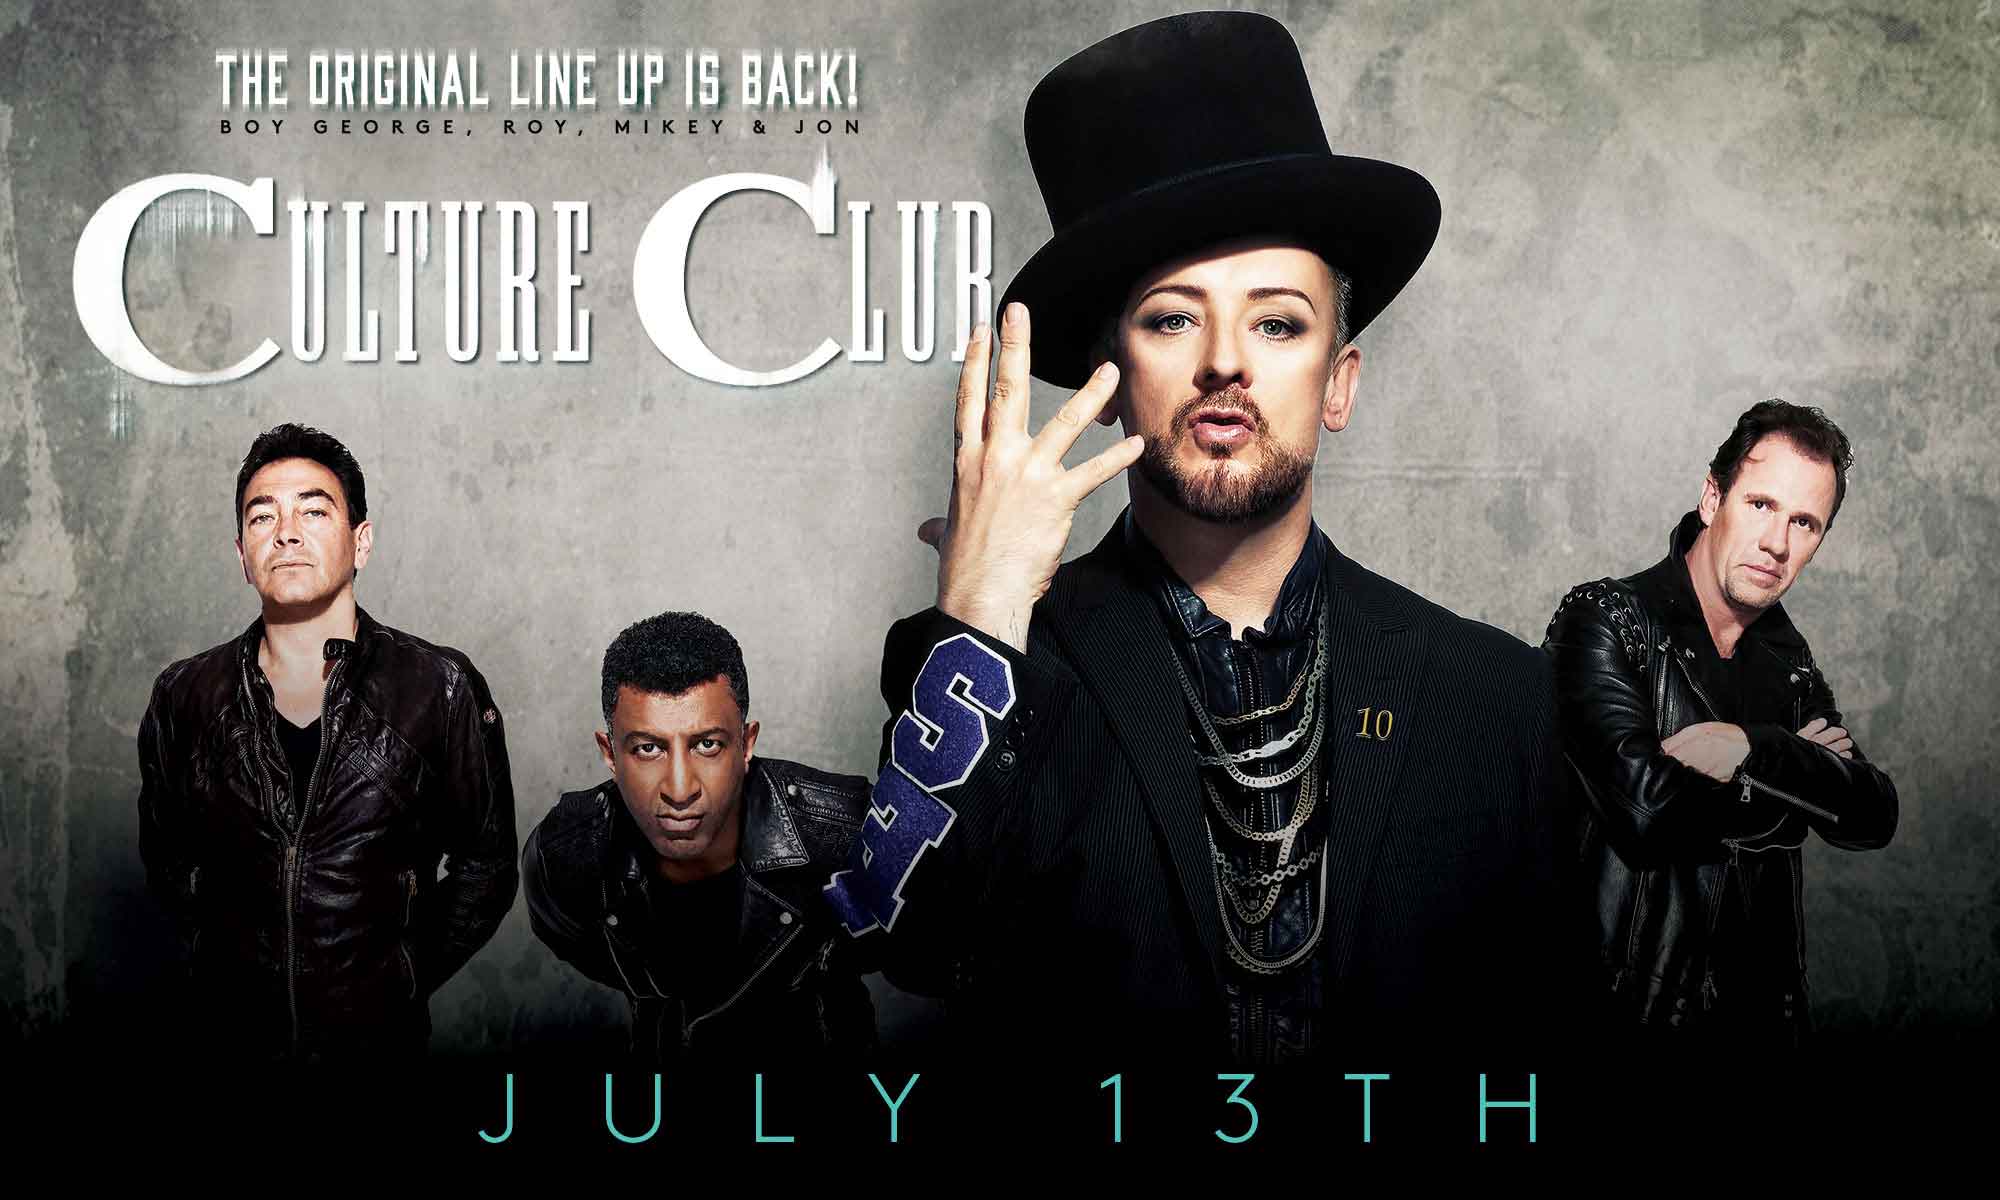 Culture Club: Original Lineup at Coney Island Amphitheater on 07-13-16